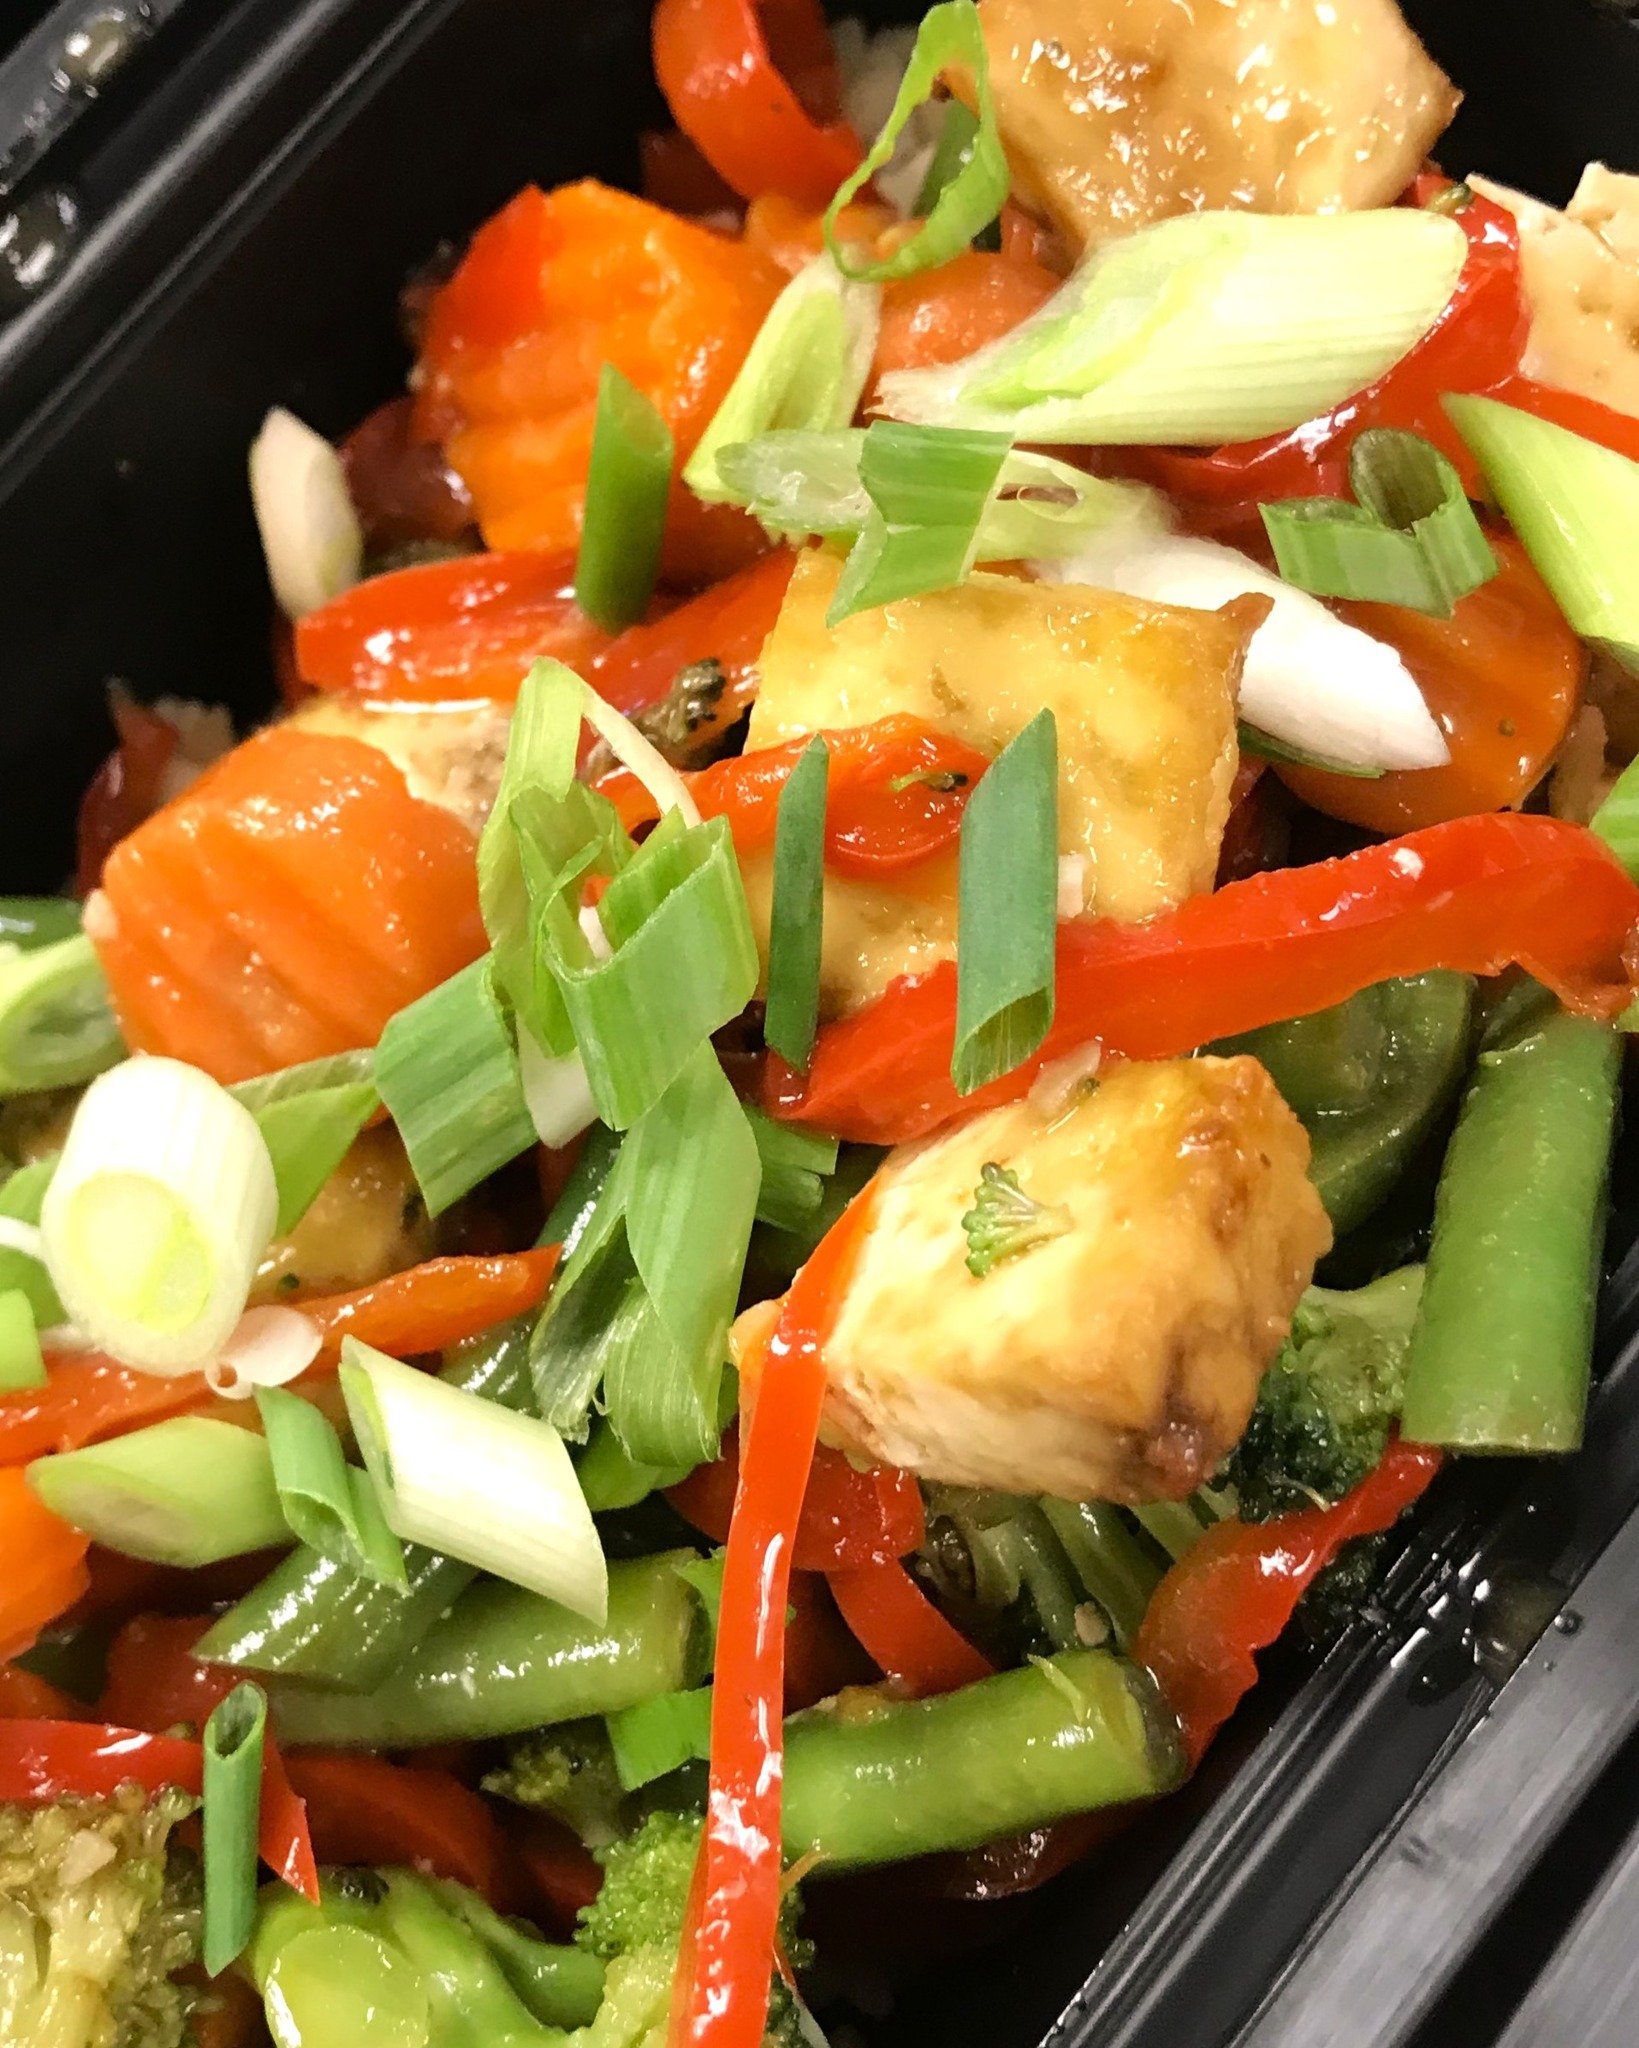 Meatless Monday Recipe: Tofu Stir-Fry

Let&rsquo;s be honest, tofu can be intimidating. This recipe combines fresh veggies, sweet and savory sauce, and tasty tofu to create a vibrant plant-forward meal &ndash; perfect for those new to cooking tofu.

